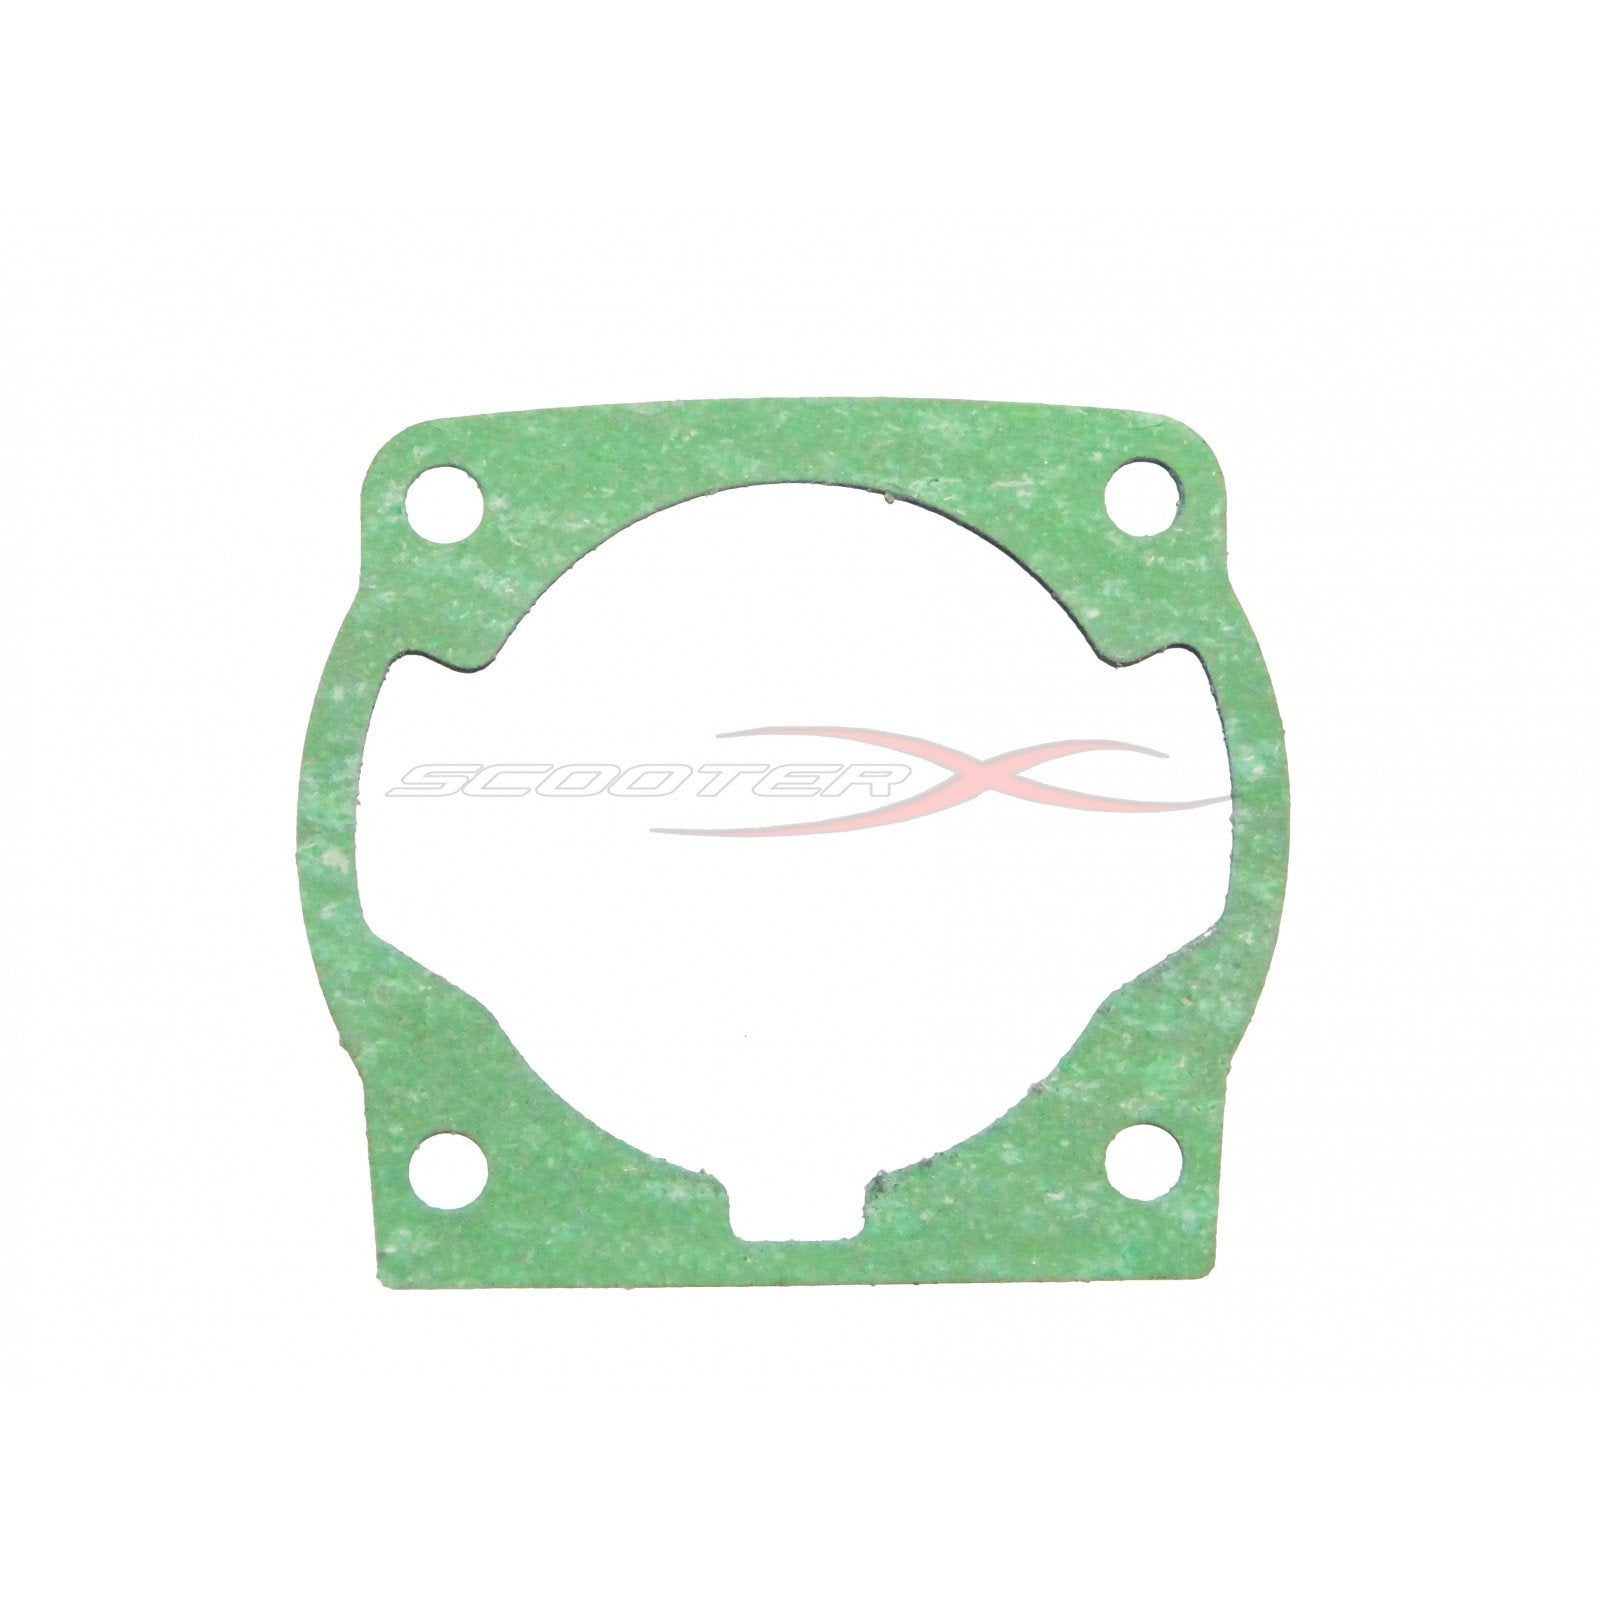 ScooterX CYLINDER GASKET For 49-52cc Gas Scooters